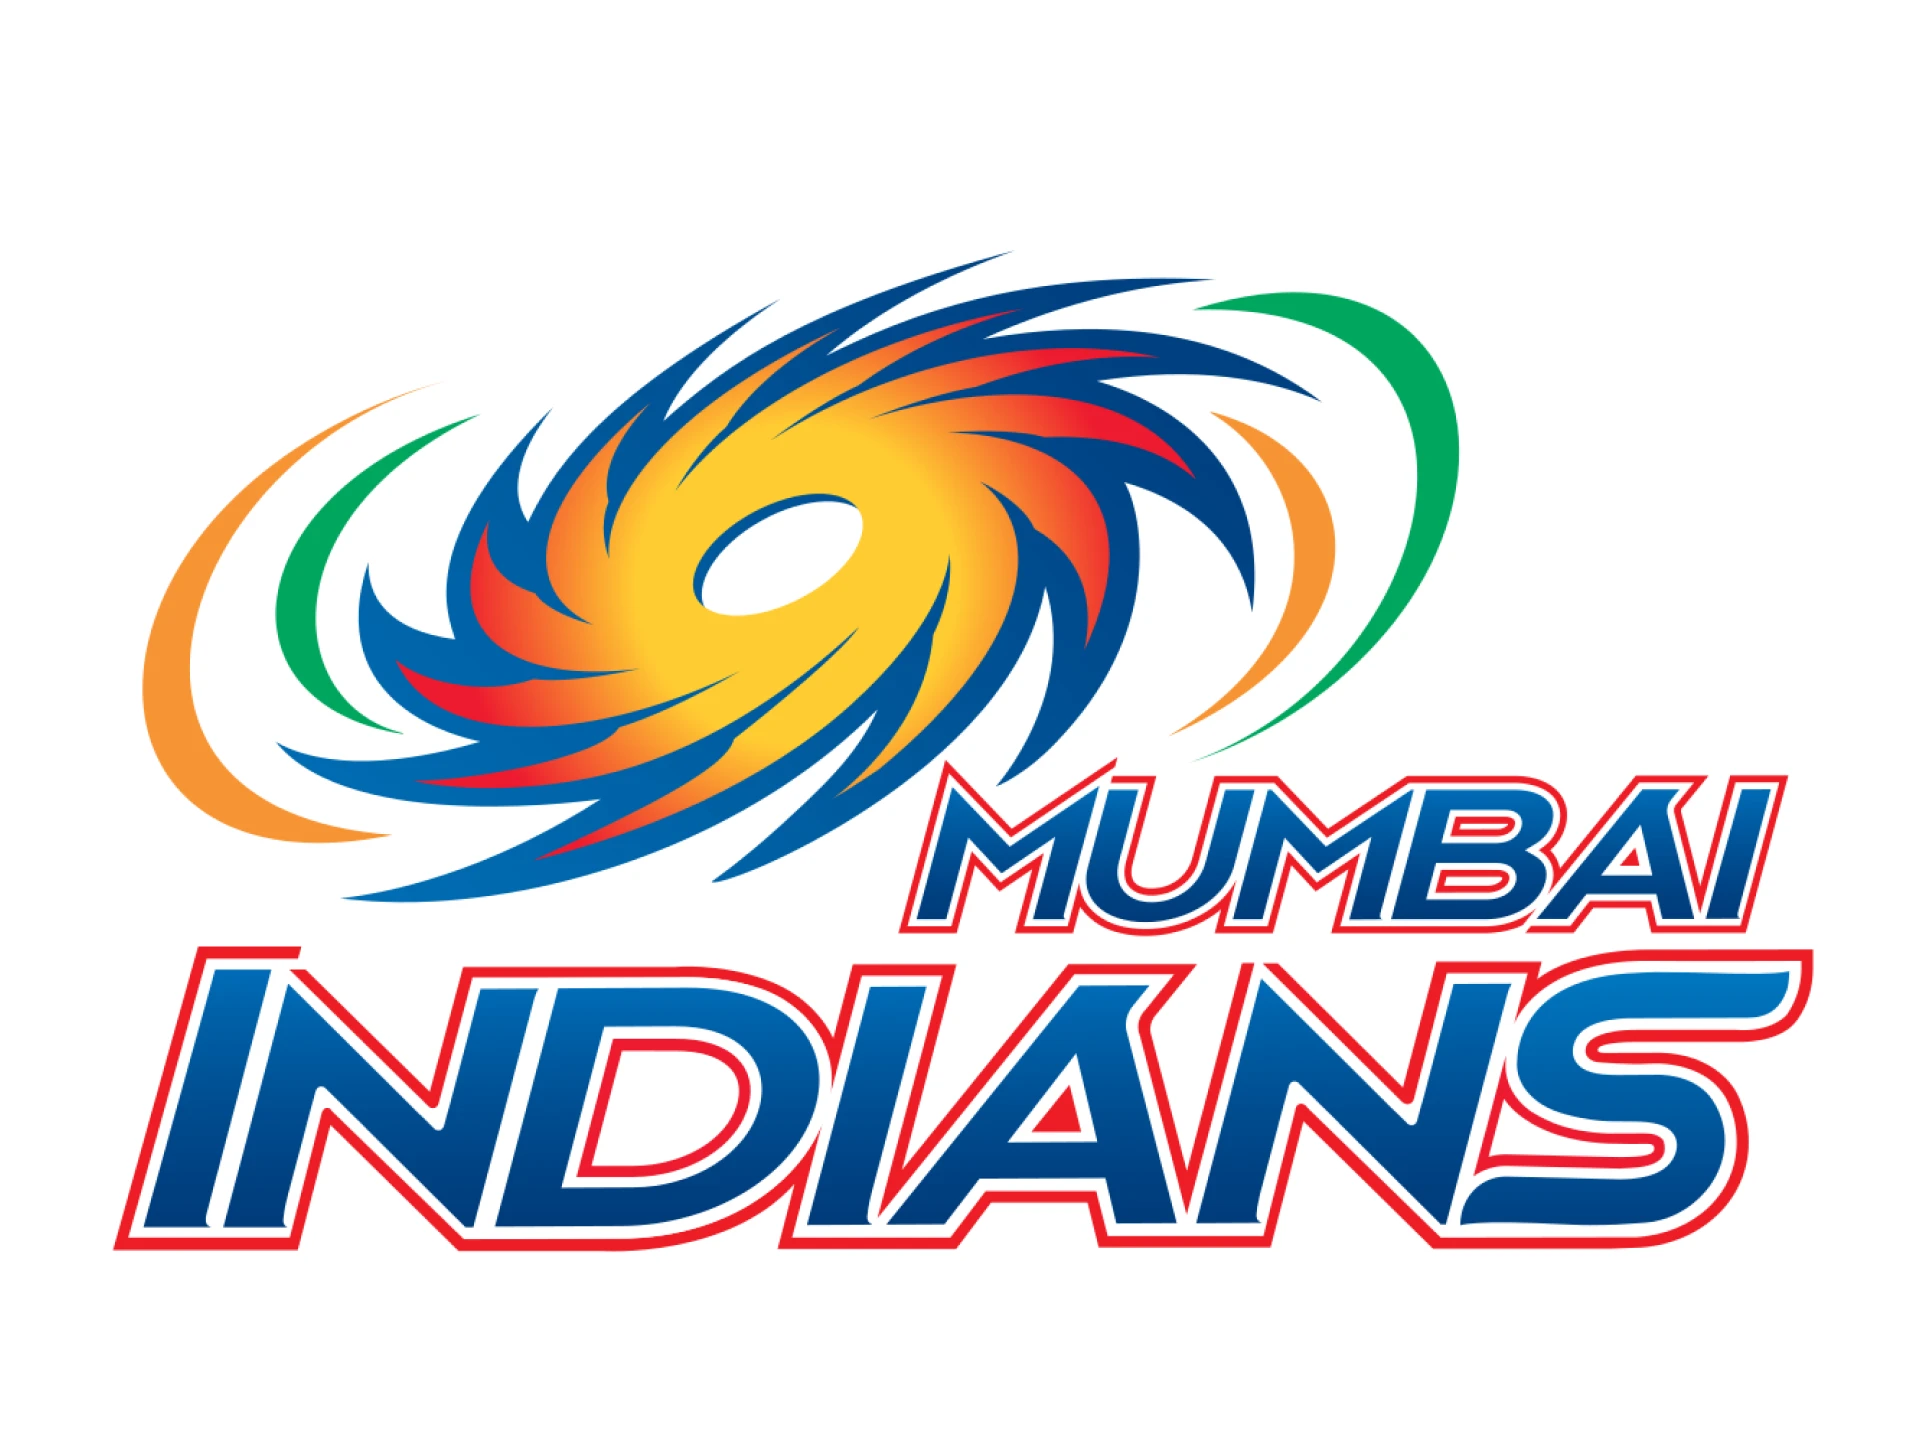 Mumbai Indians is a good team to bet on in the IPL.